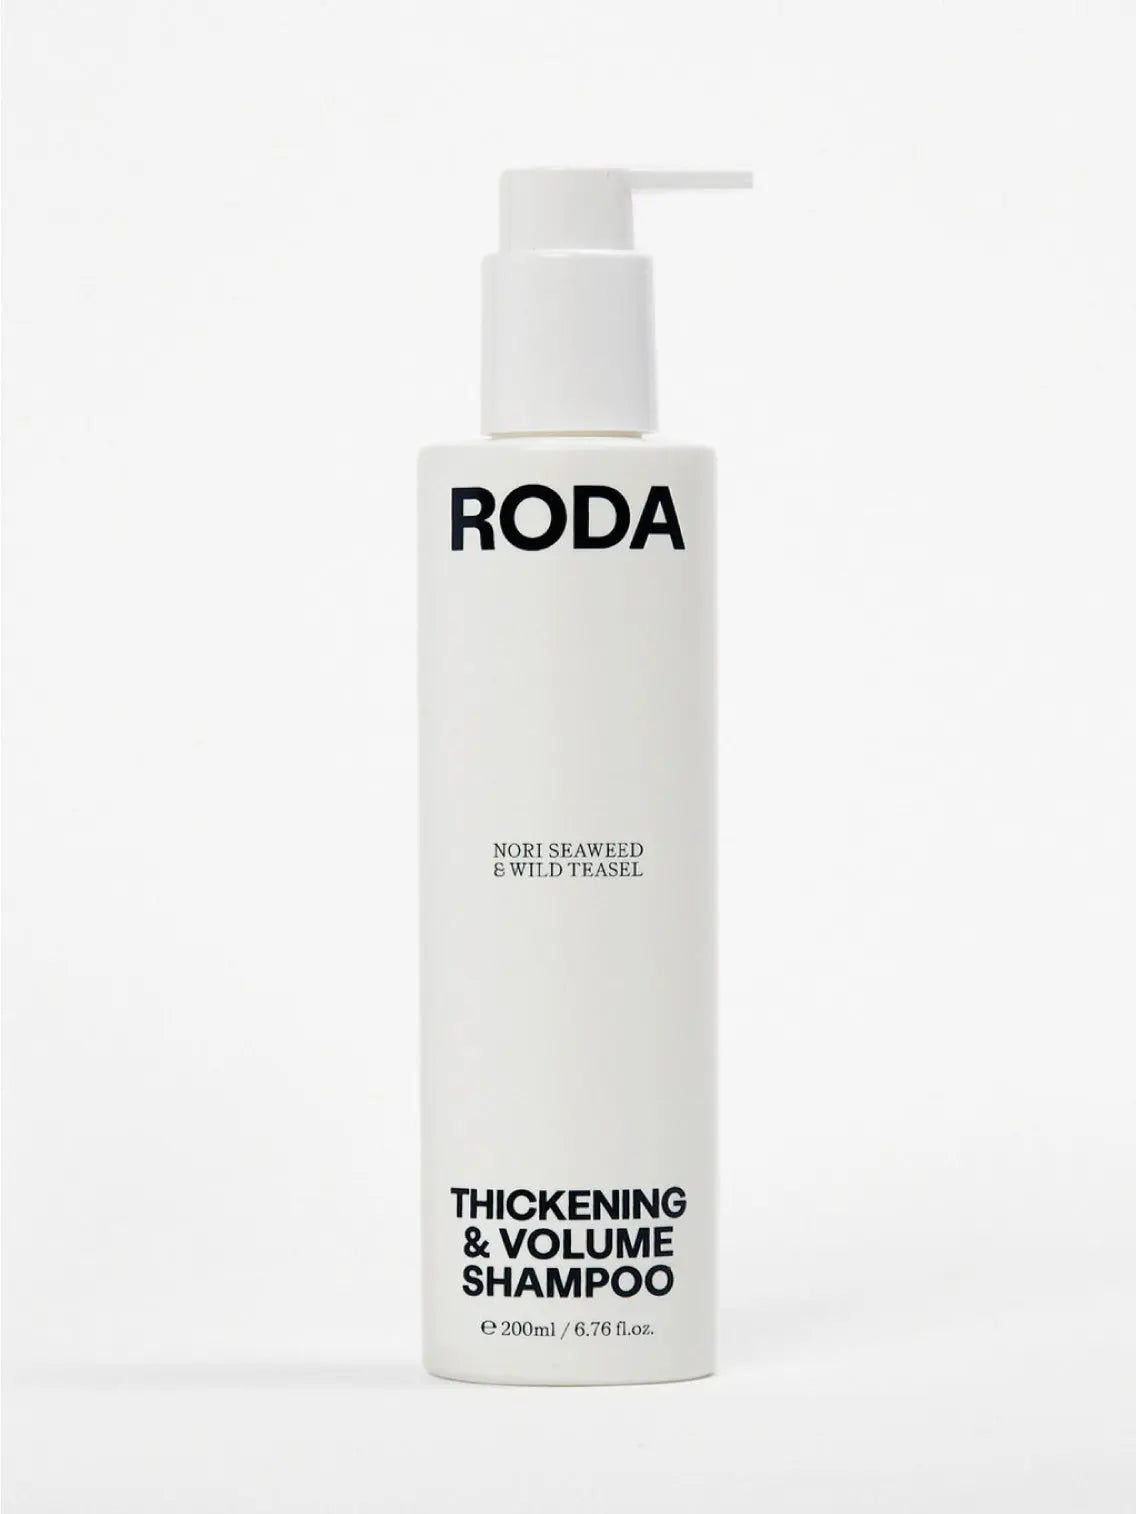 A bottle of Roda Thickening & Volume Shampoo is placed alongside its gray box. The shampoo bottle is white with a pump dispenser and black text. Nearby, there is a sprig of dried flowers and a small pile of dark seaweed. Available at Bassalstore in Barcelona, the bottle contains 200ml (6.7 fl. oz.).